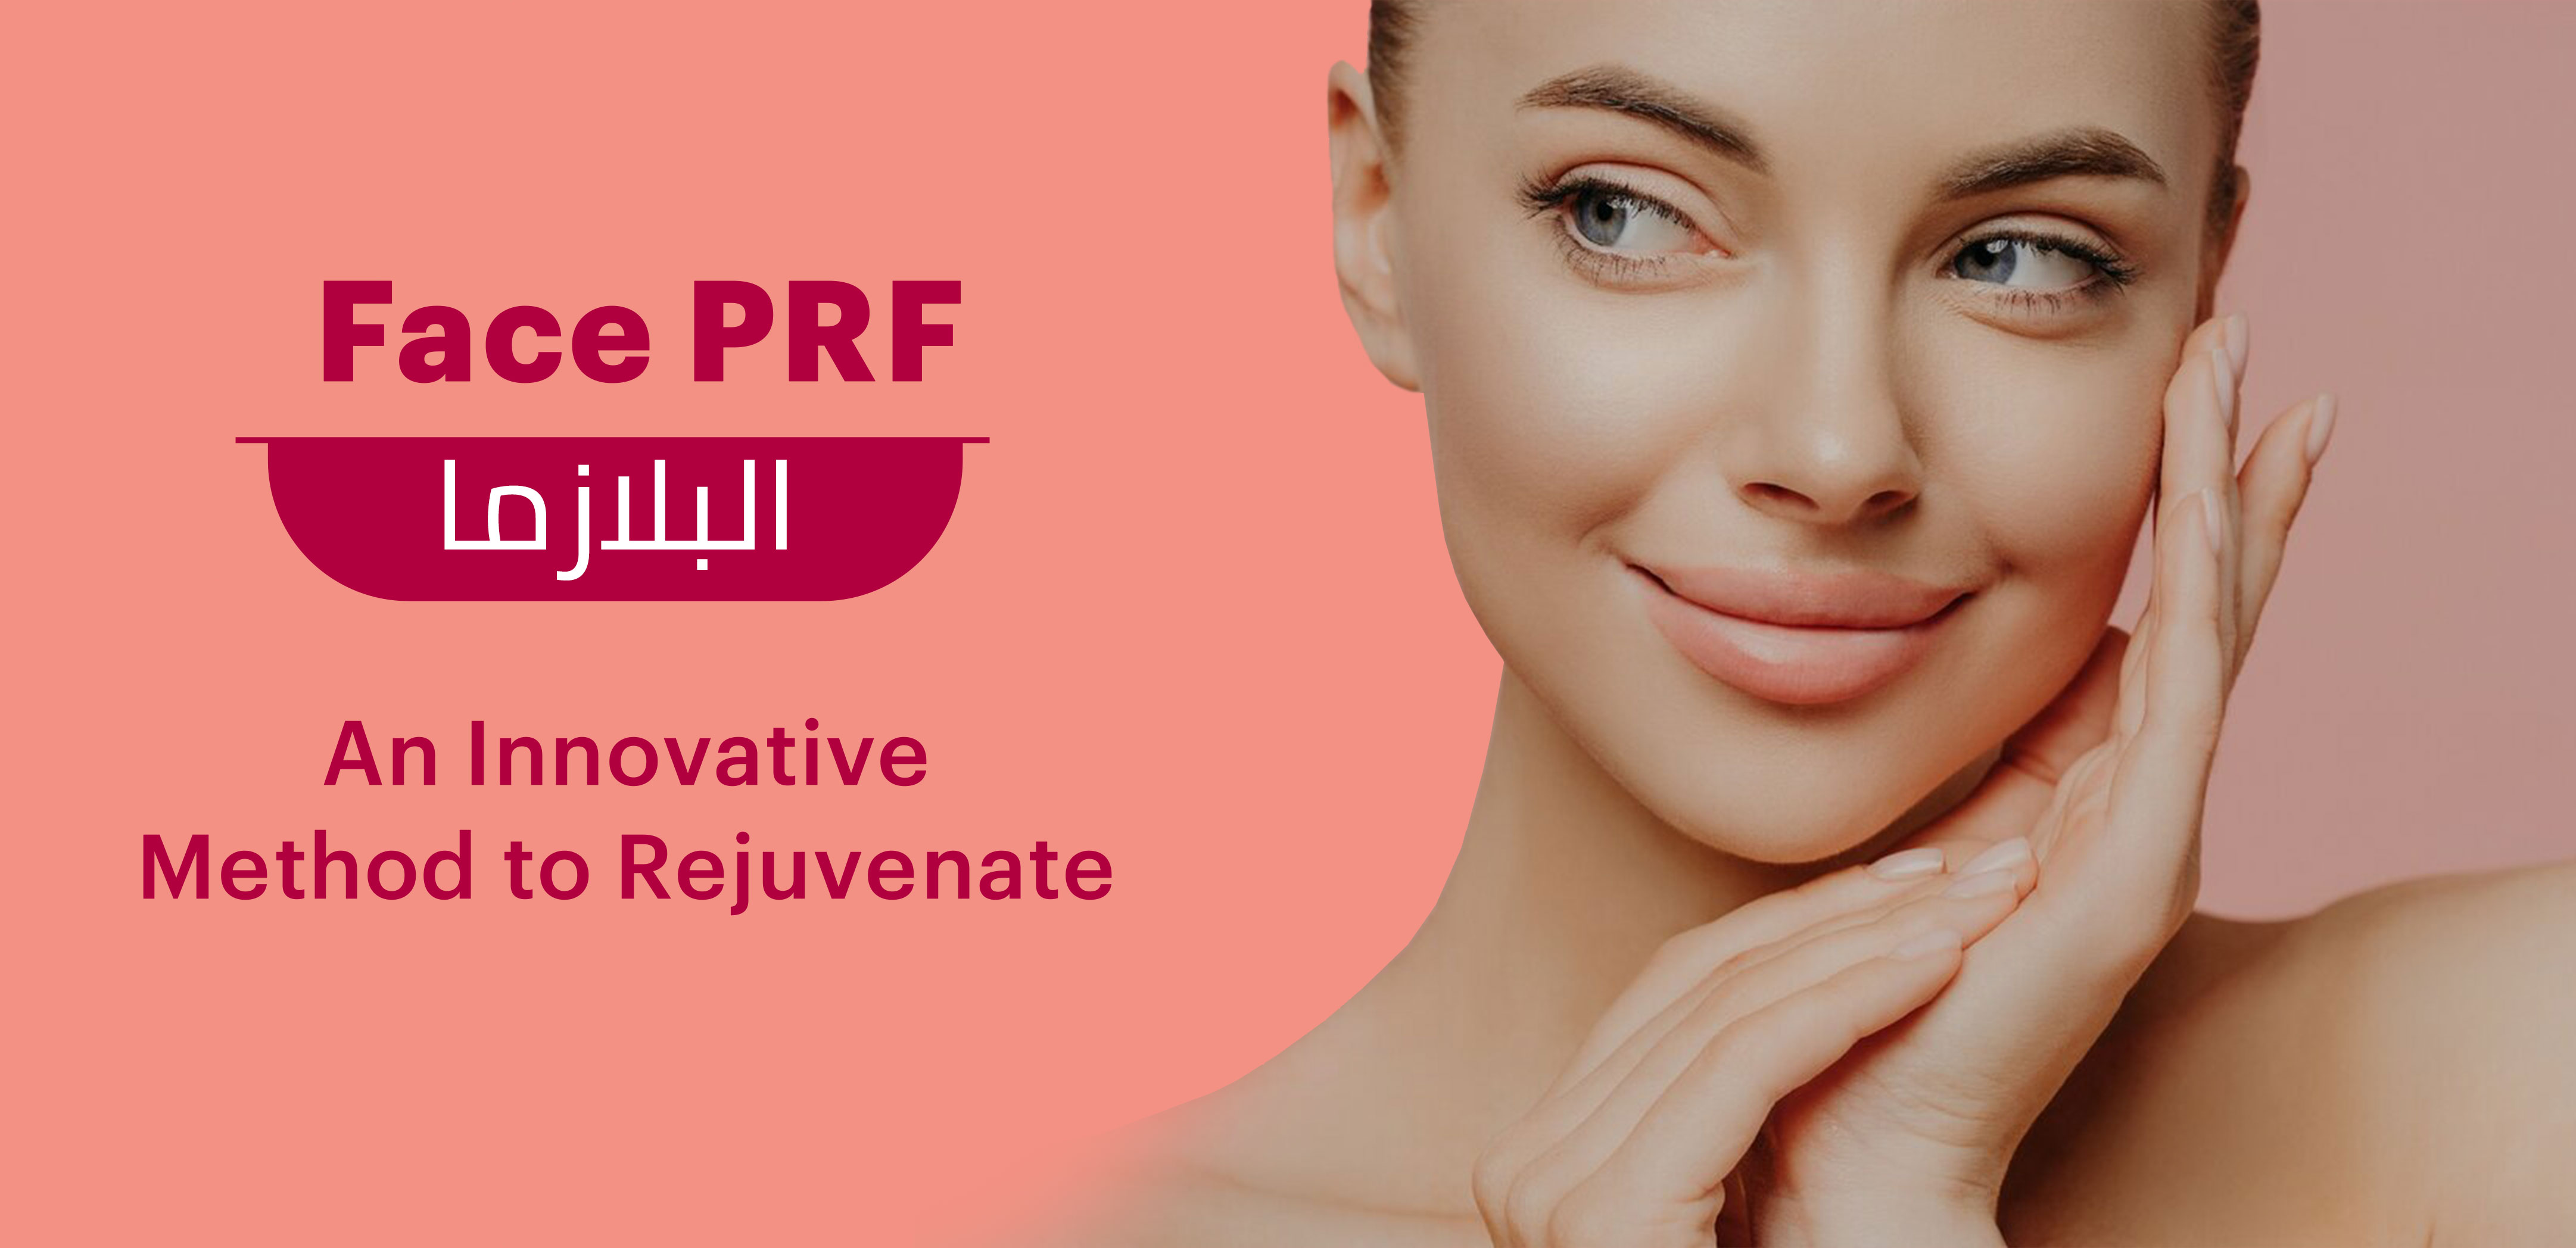 WHAT IS FACE PRF TREATMENT?